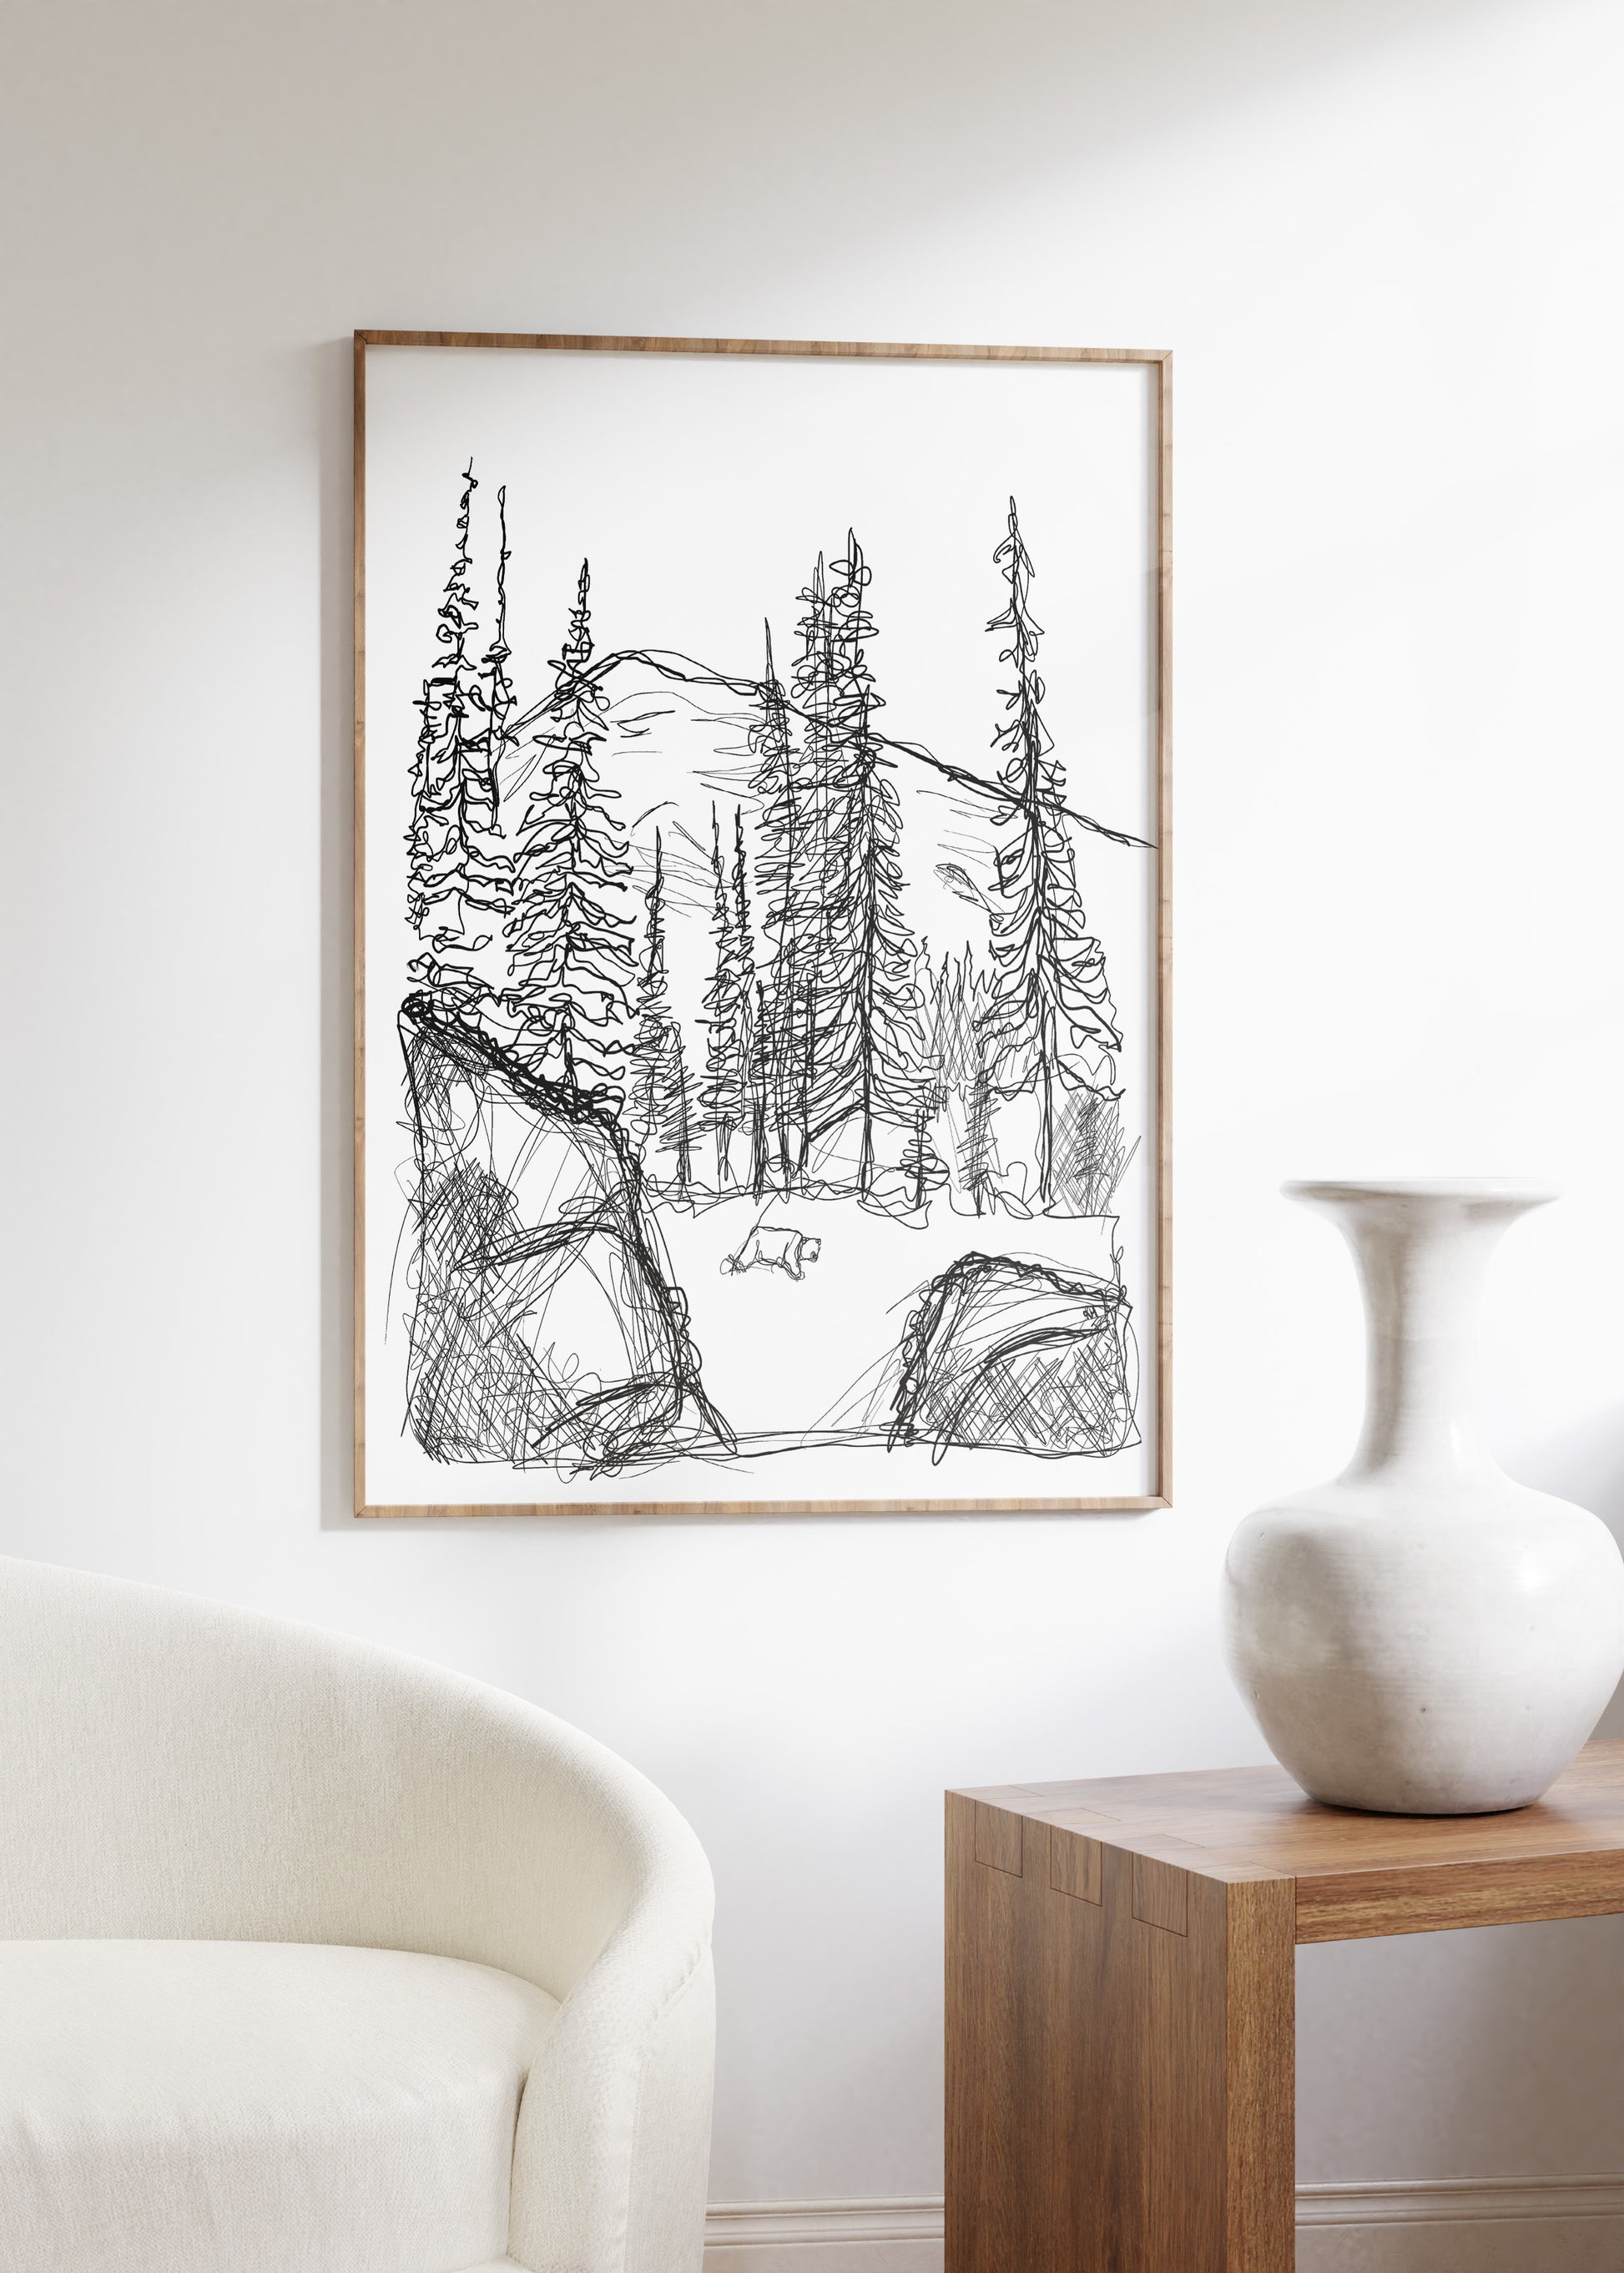 bear line art, one line drawing, mountain line art, mountain wall art, bear wall art, minimalist line art, bear print, rocky mountain wall art, large print in natural wood frame in living room